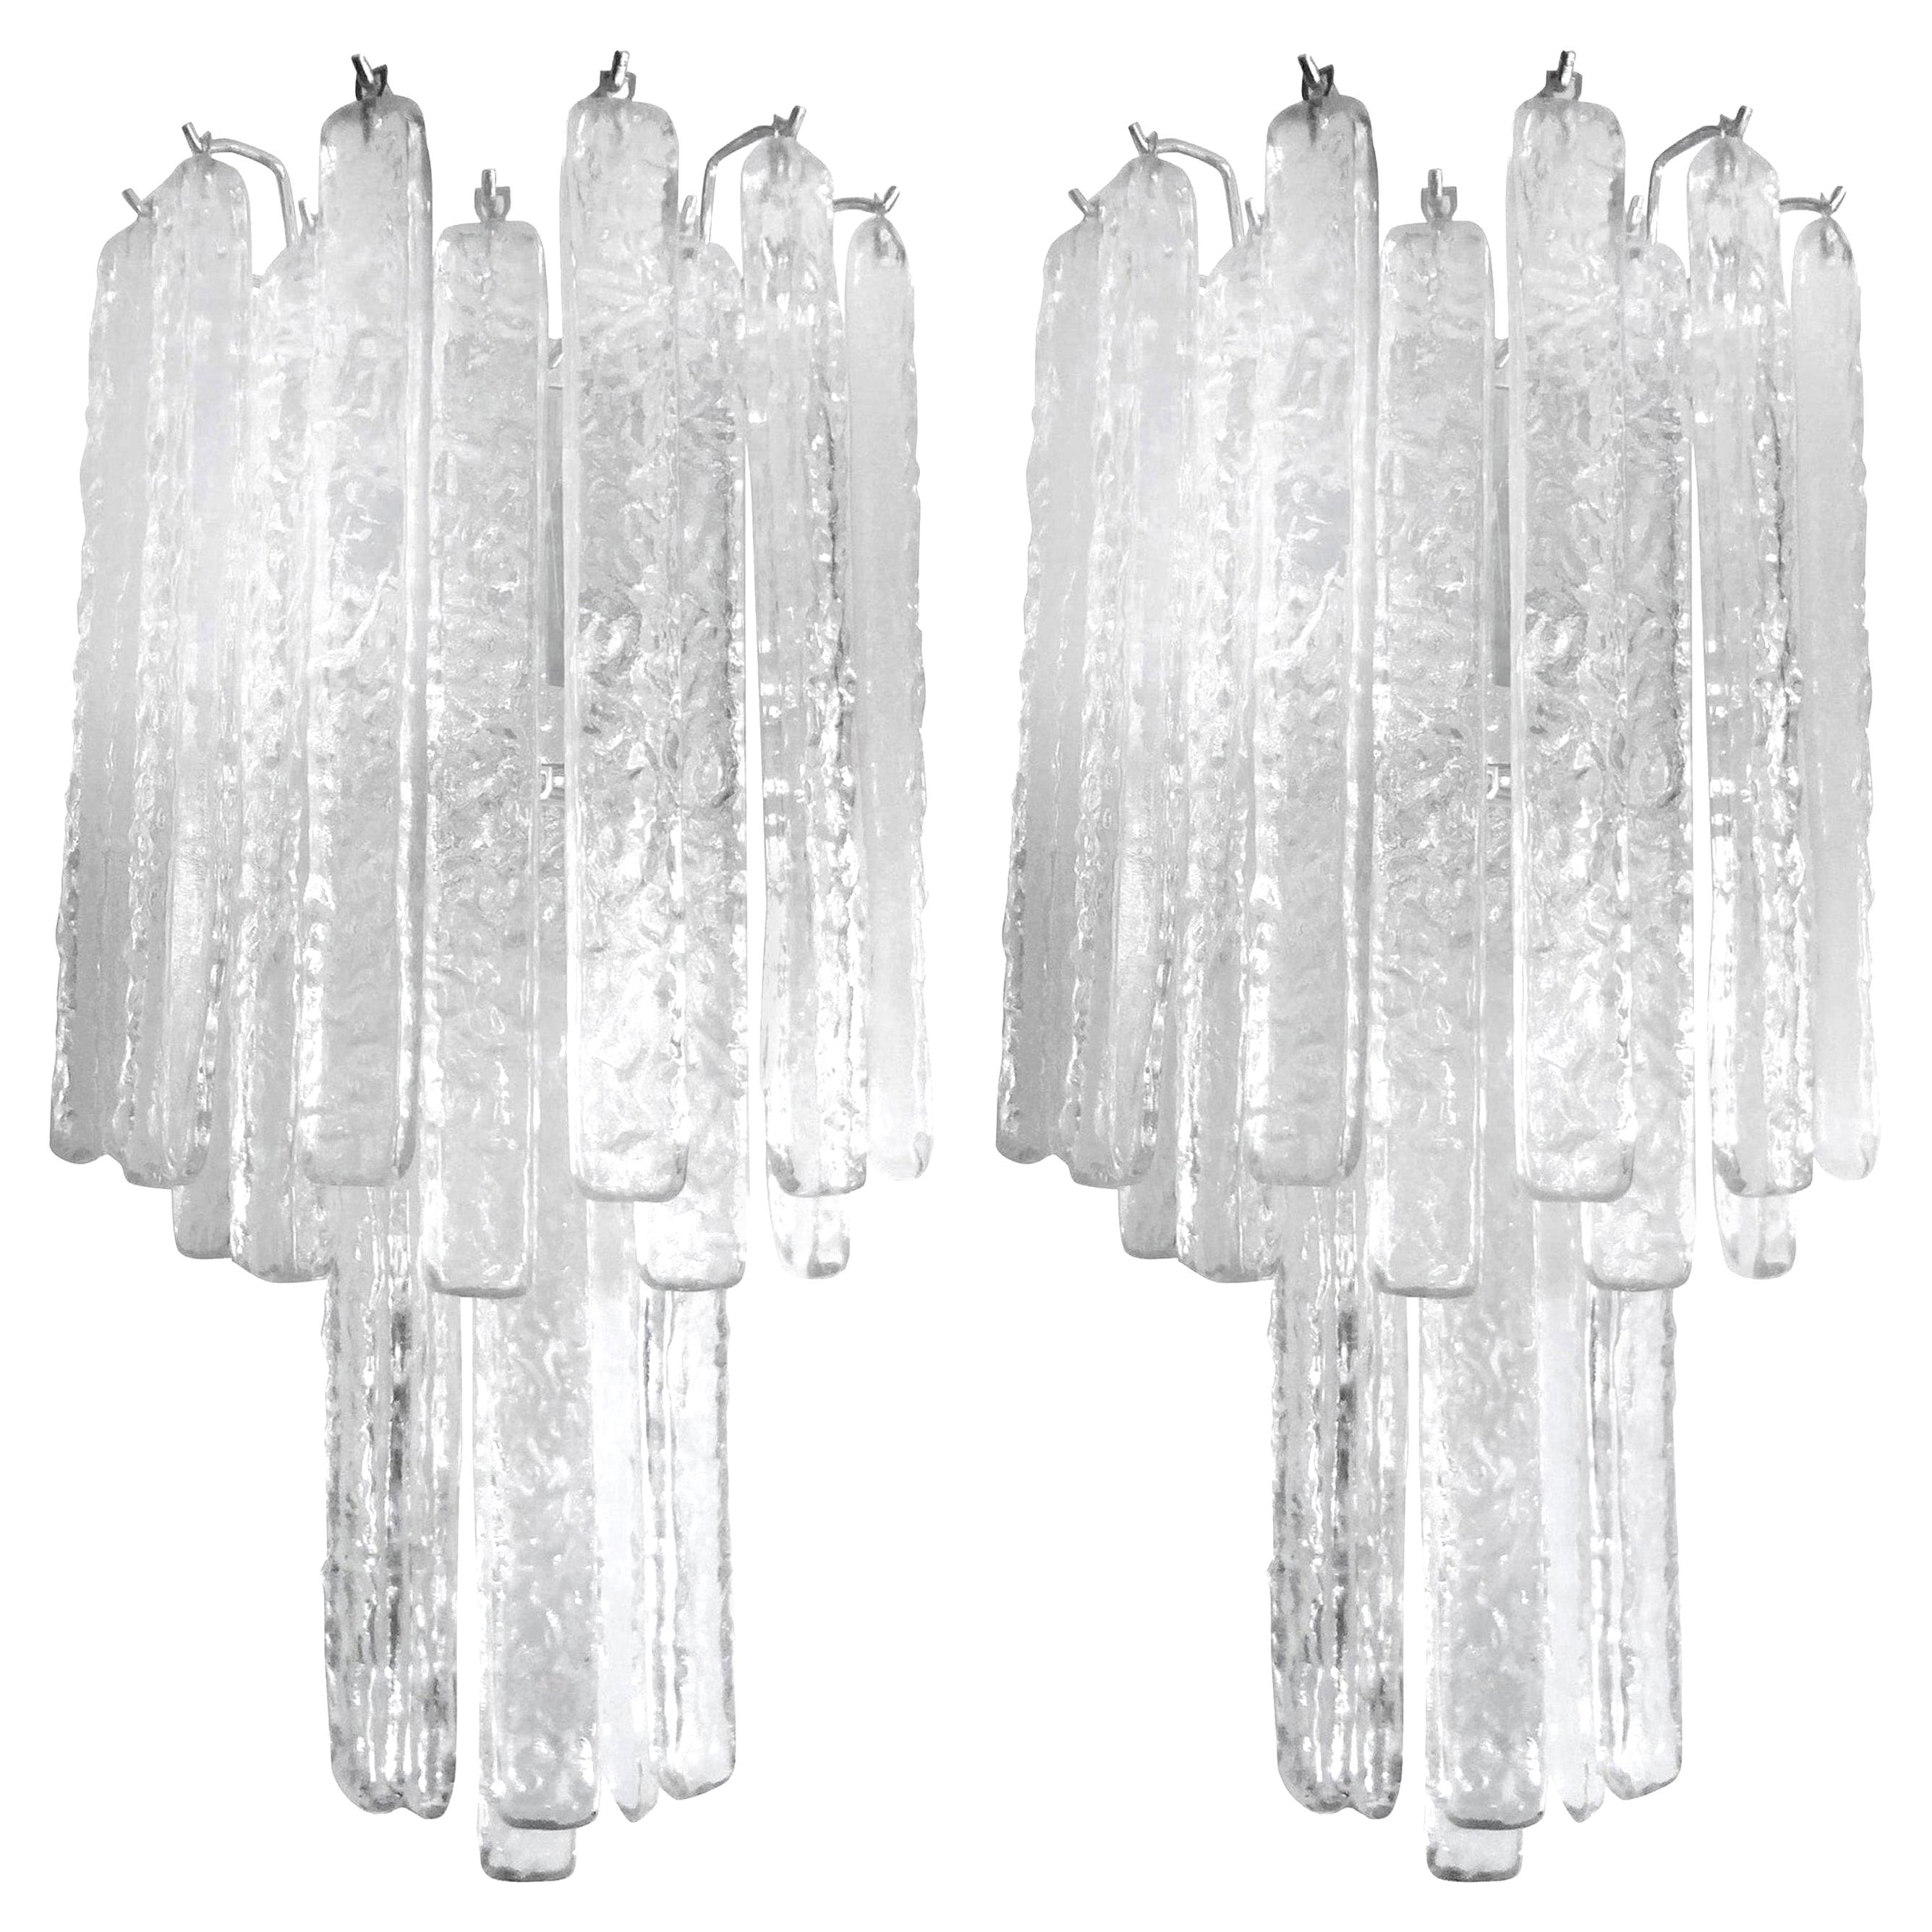 Pair of Venini Style Murano Glass Icicle Sconces